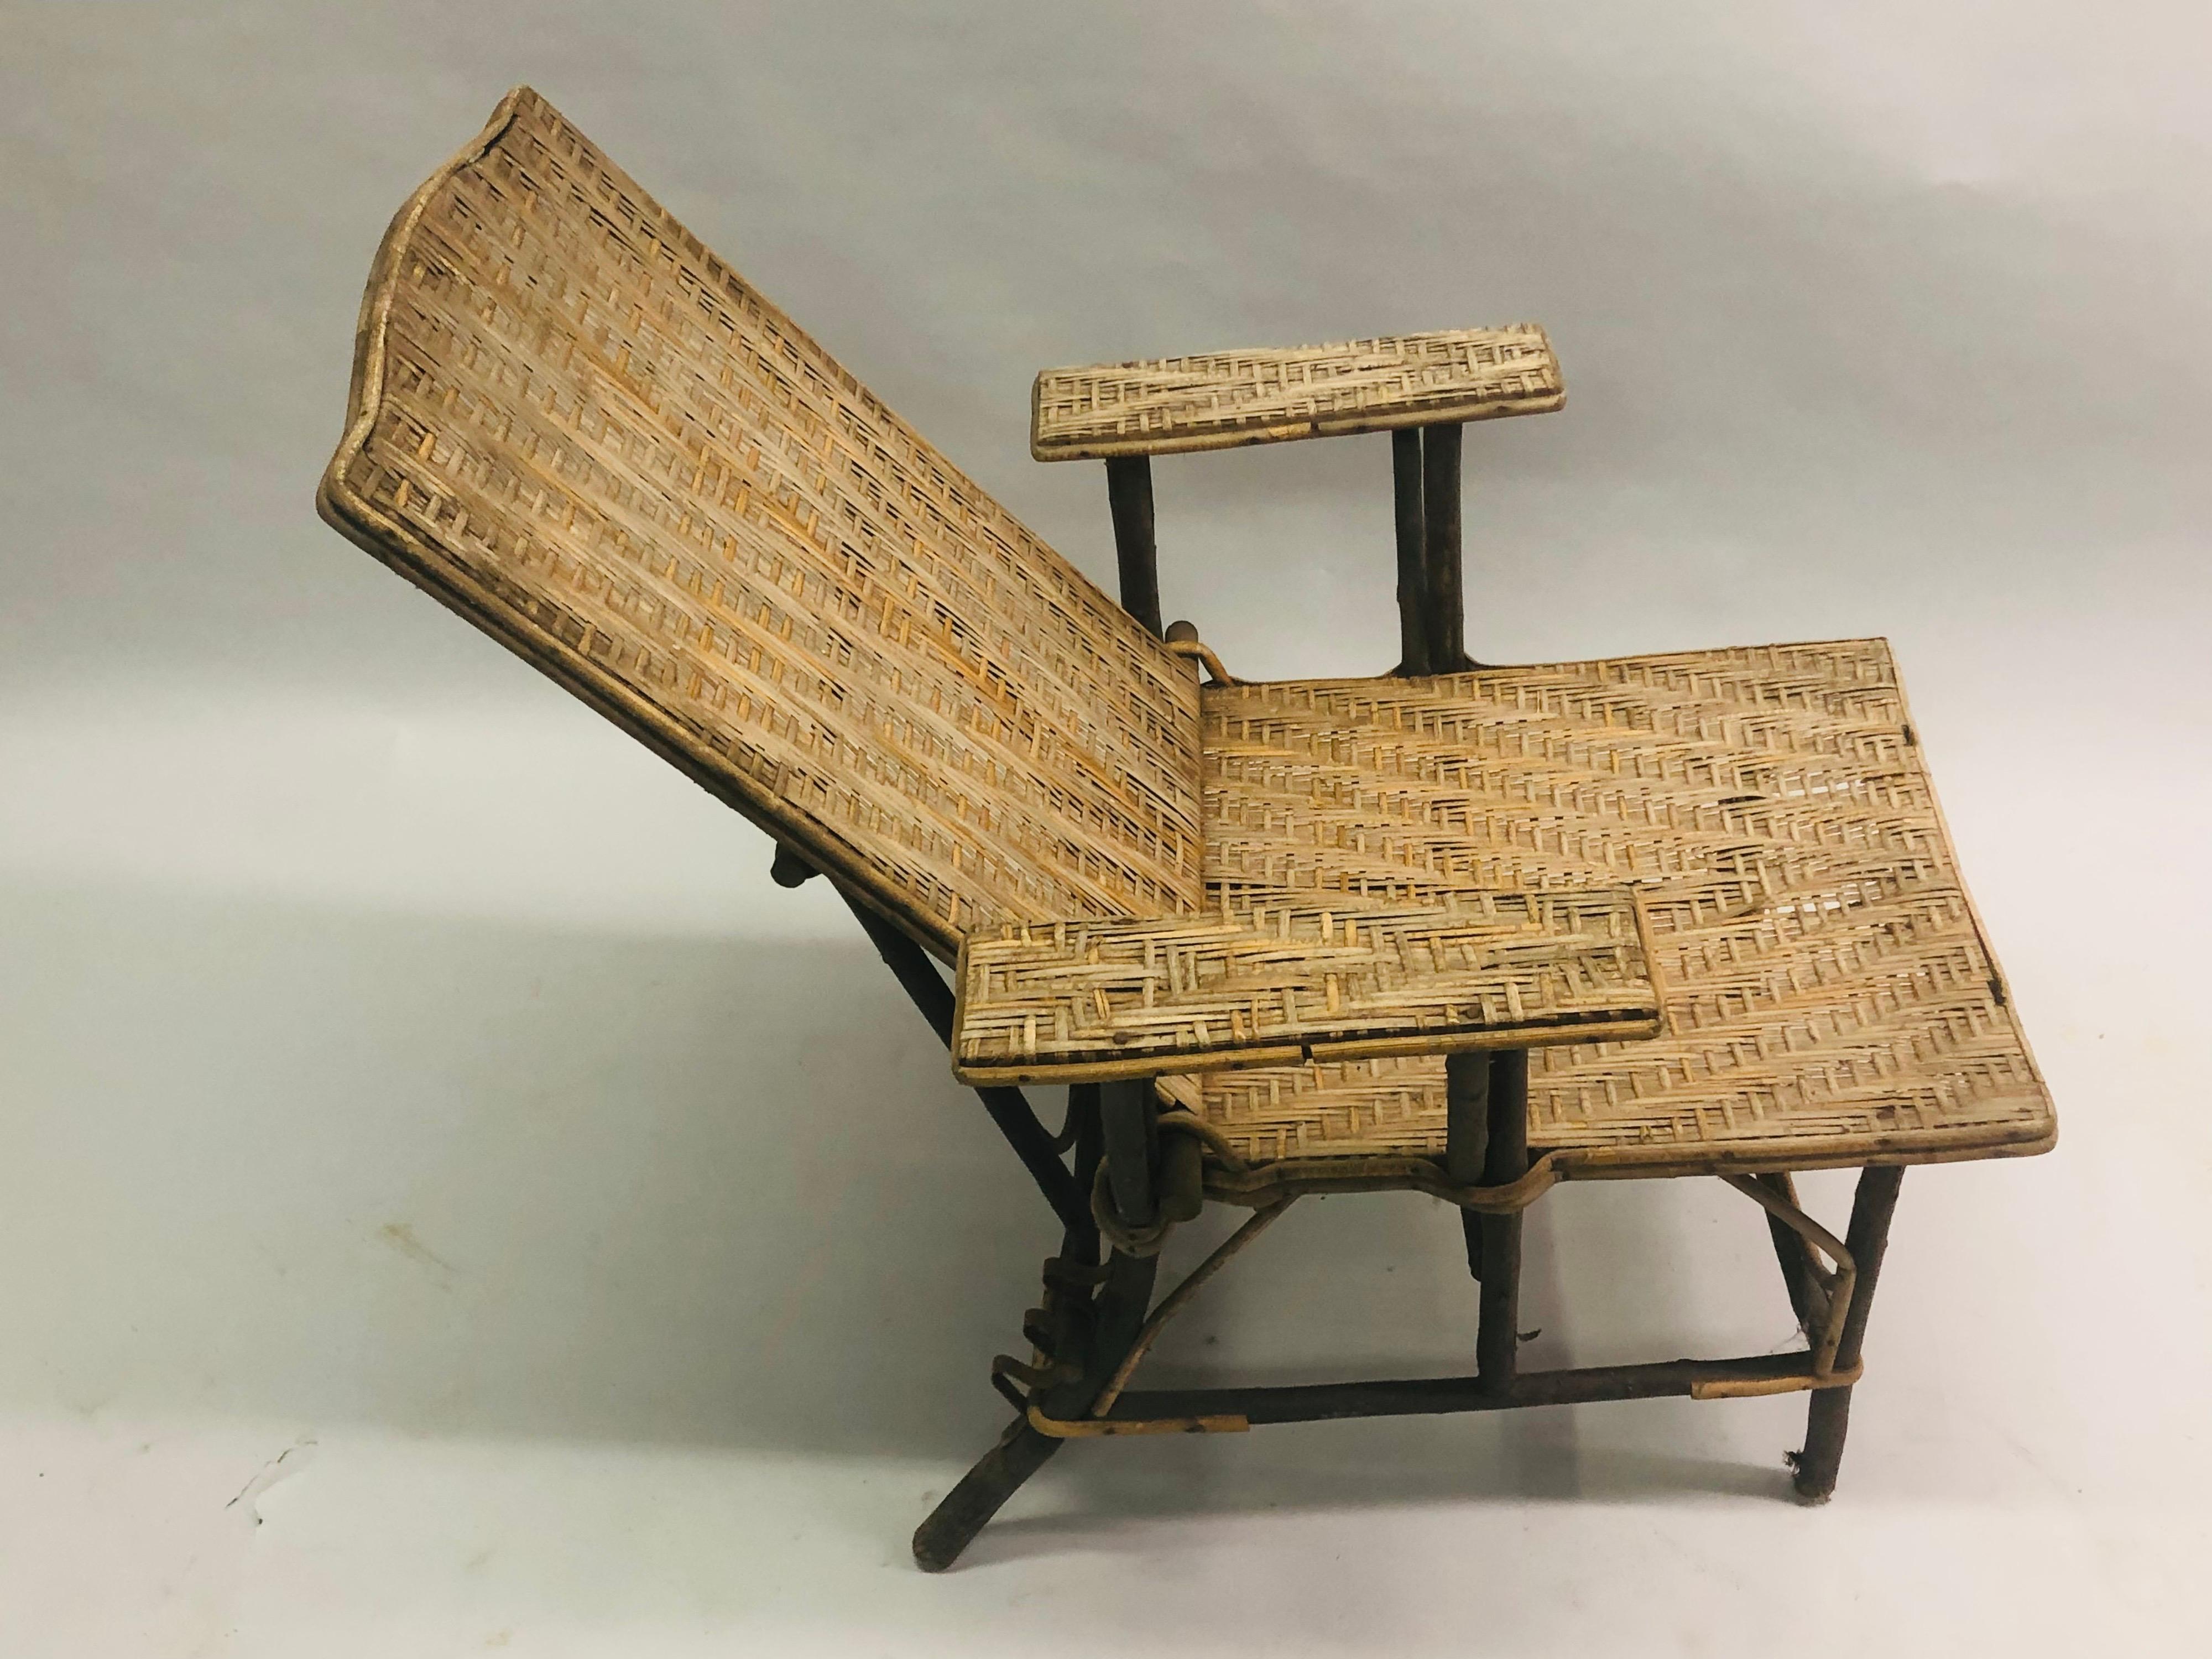 French Art Deco Rattan Lounge Chair / Recliner / Chaise Longue, 1920 For Sale 4